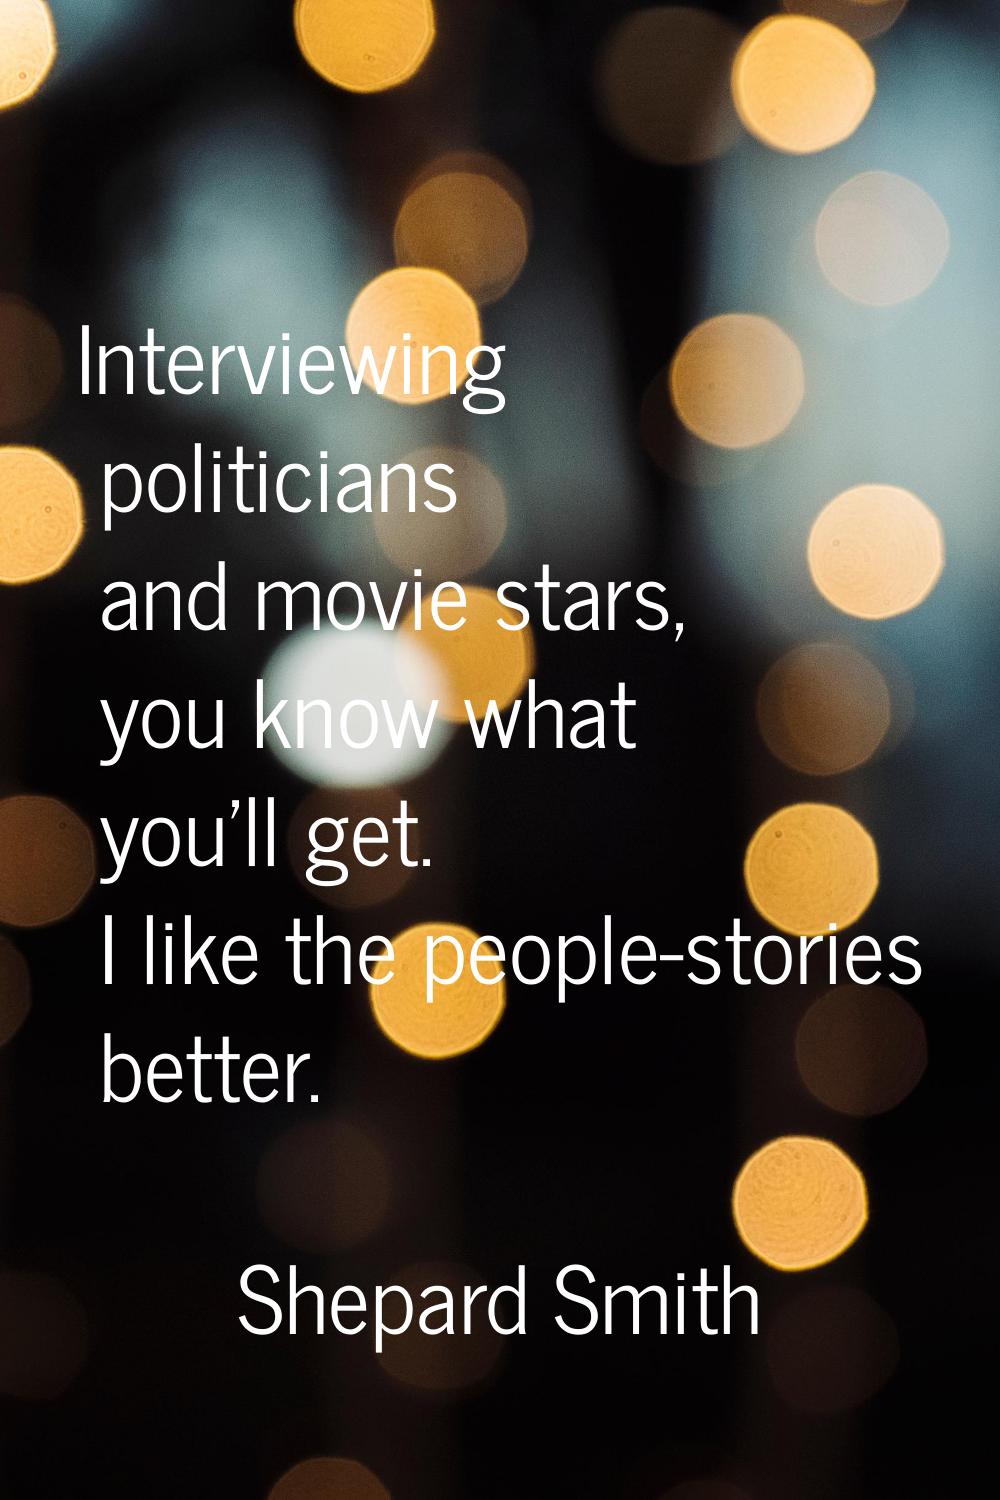 Interviewing politicians and movie stars, you know what you'll get. I like the people-stories bette